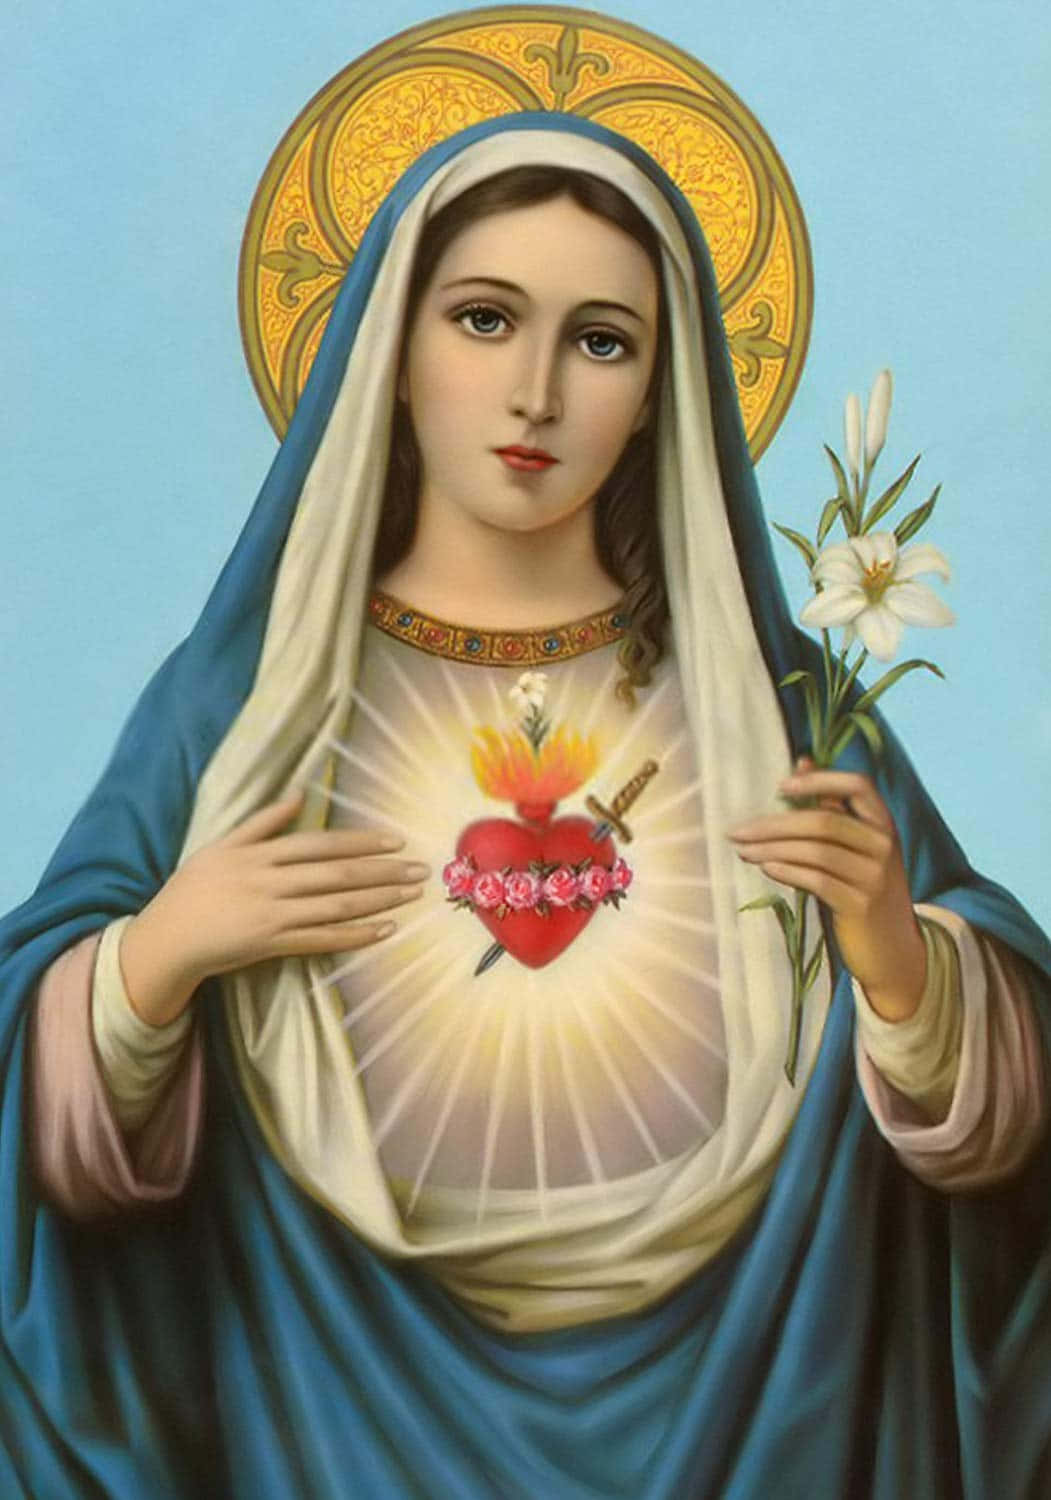 Mother Mary stands in front of a holy scene Wallpaper